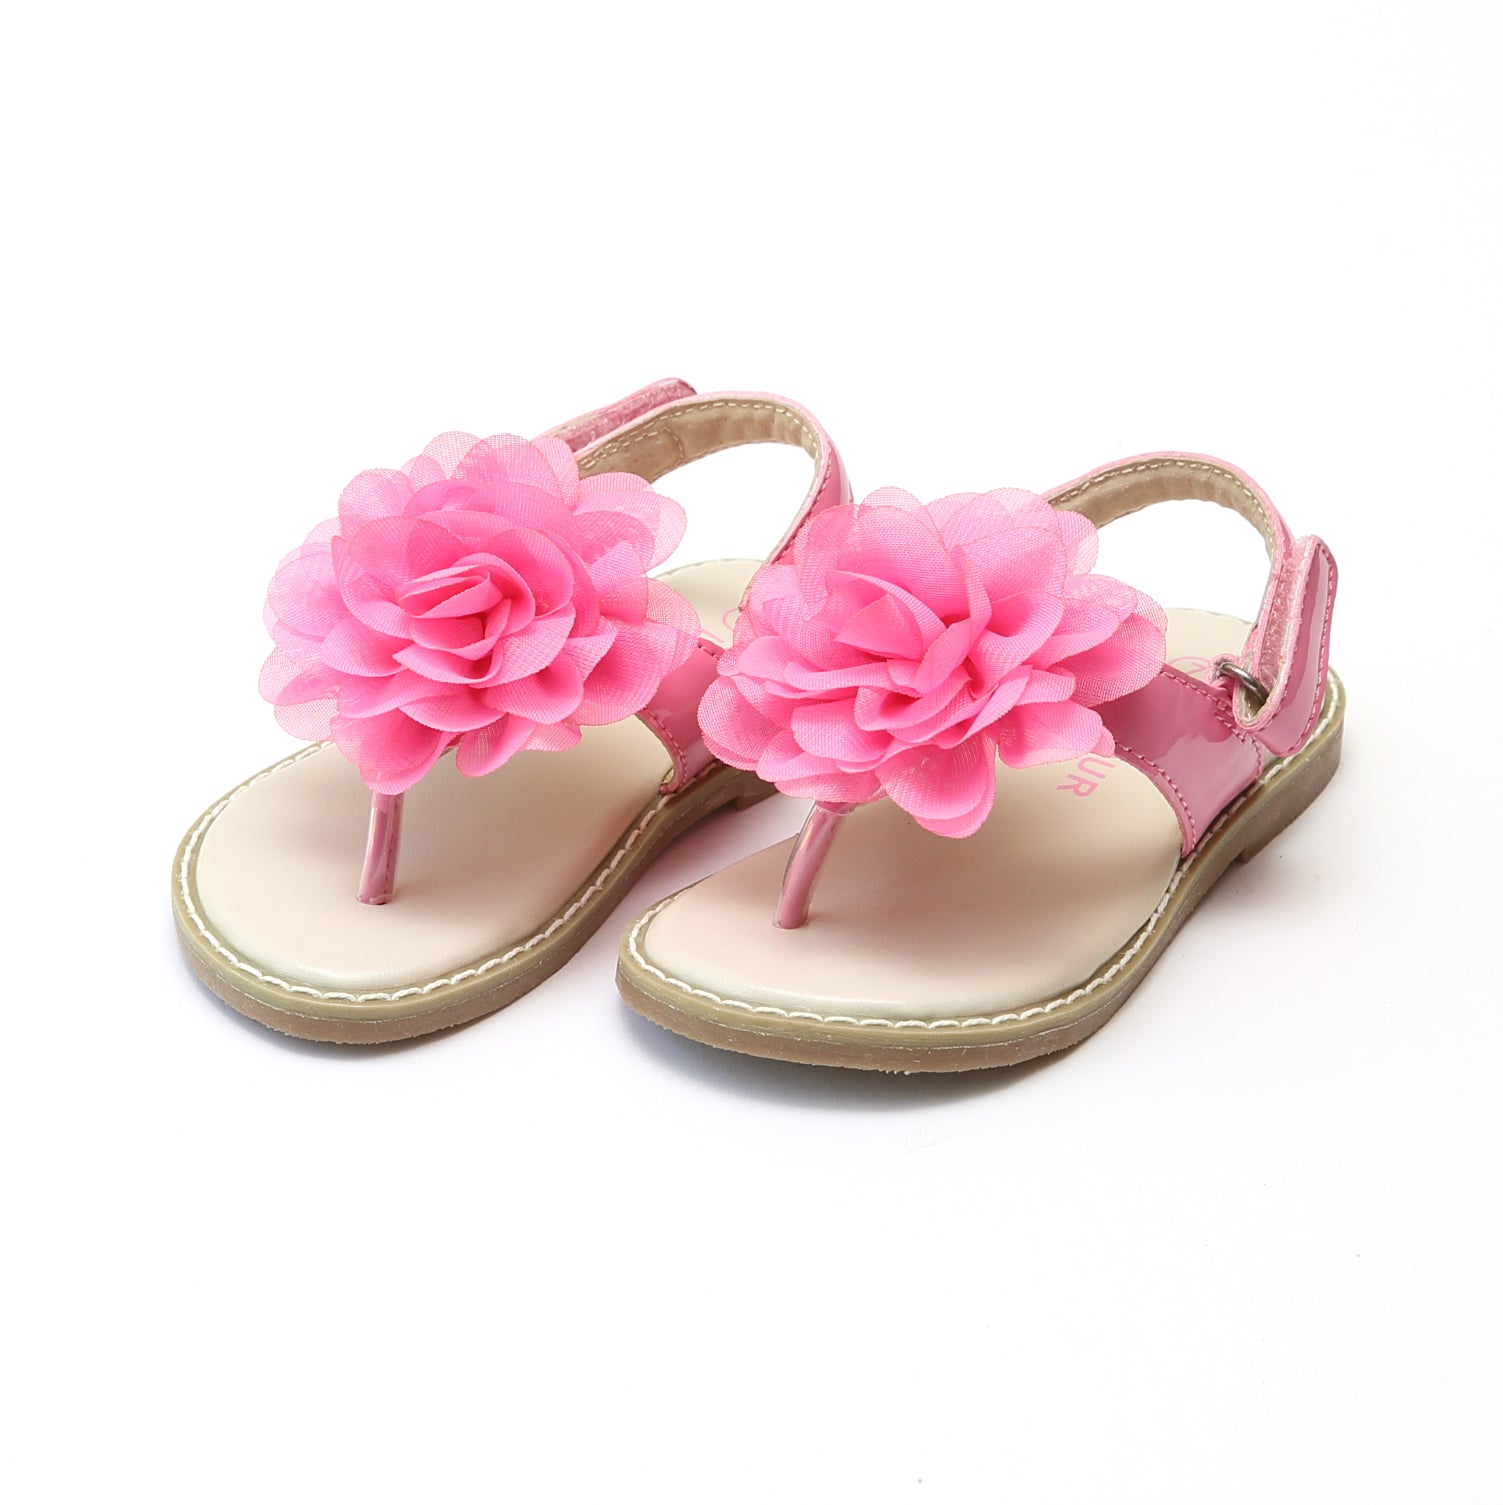 L'Amour Girls Matilda Special Occasion Organza Flower Thong Sandal